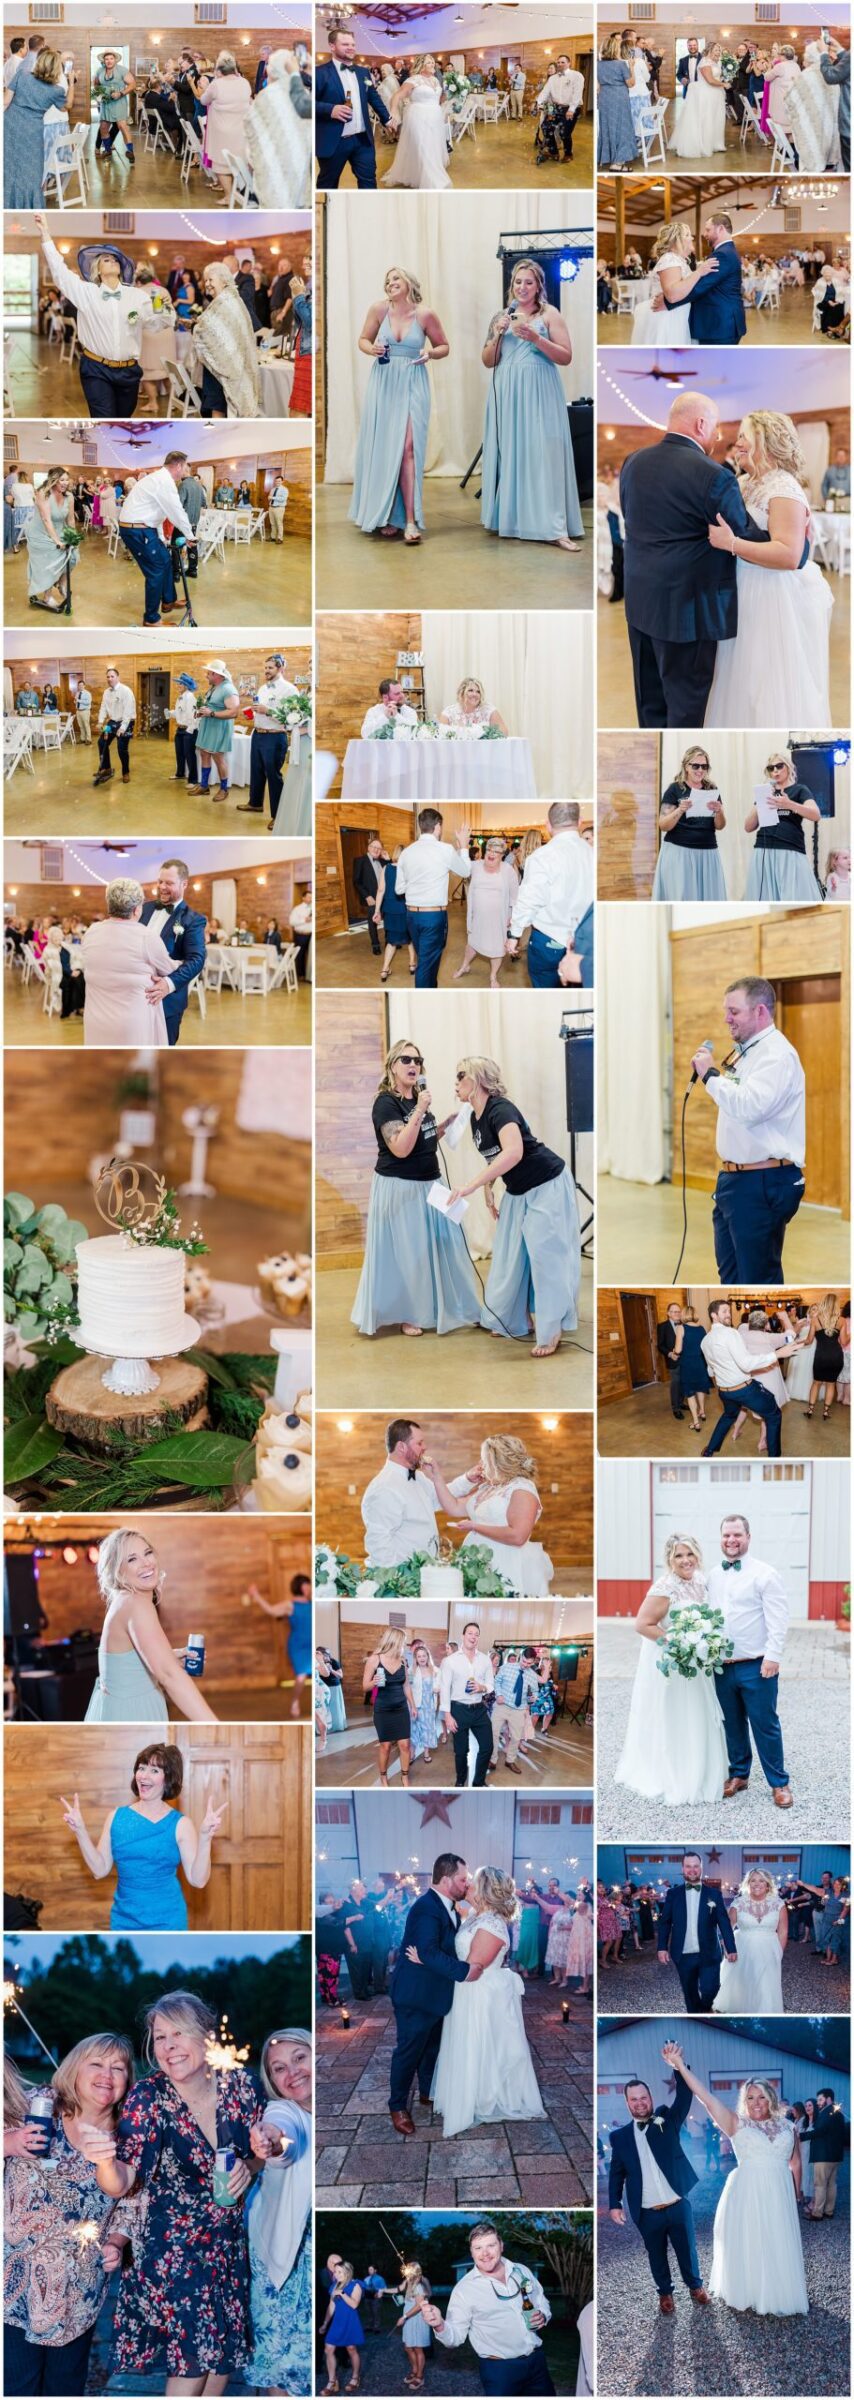 Super fun reception photos complete with bubbles, dancing and sparklers in the venue space at Harley's Haven